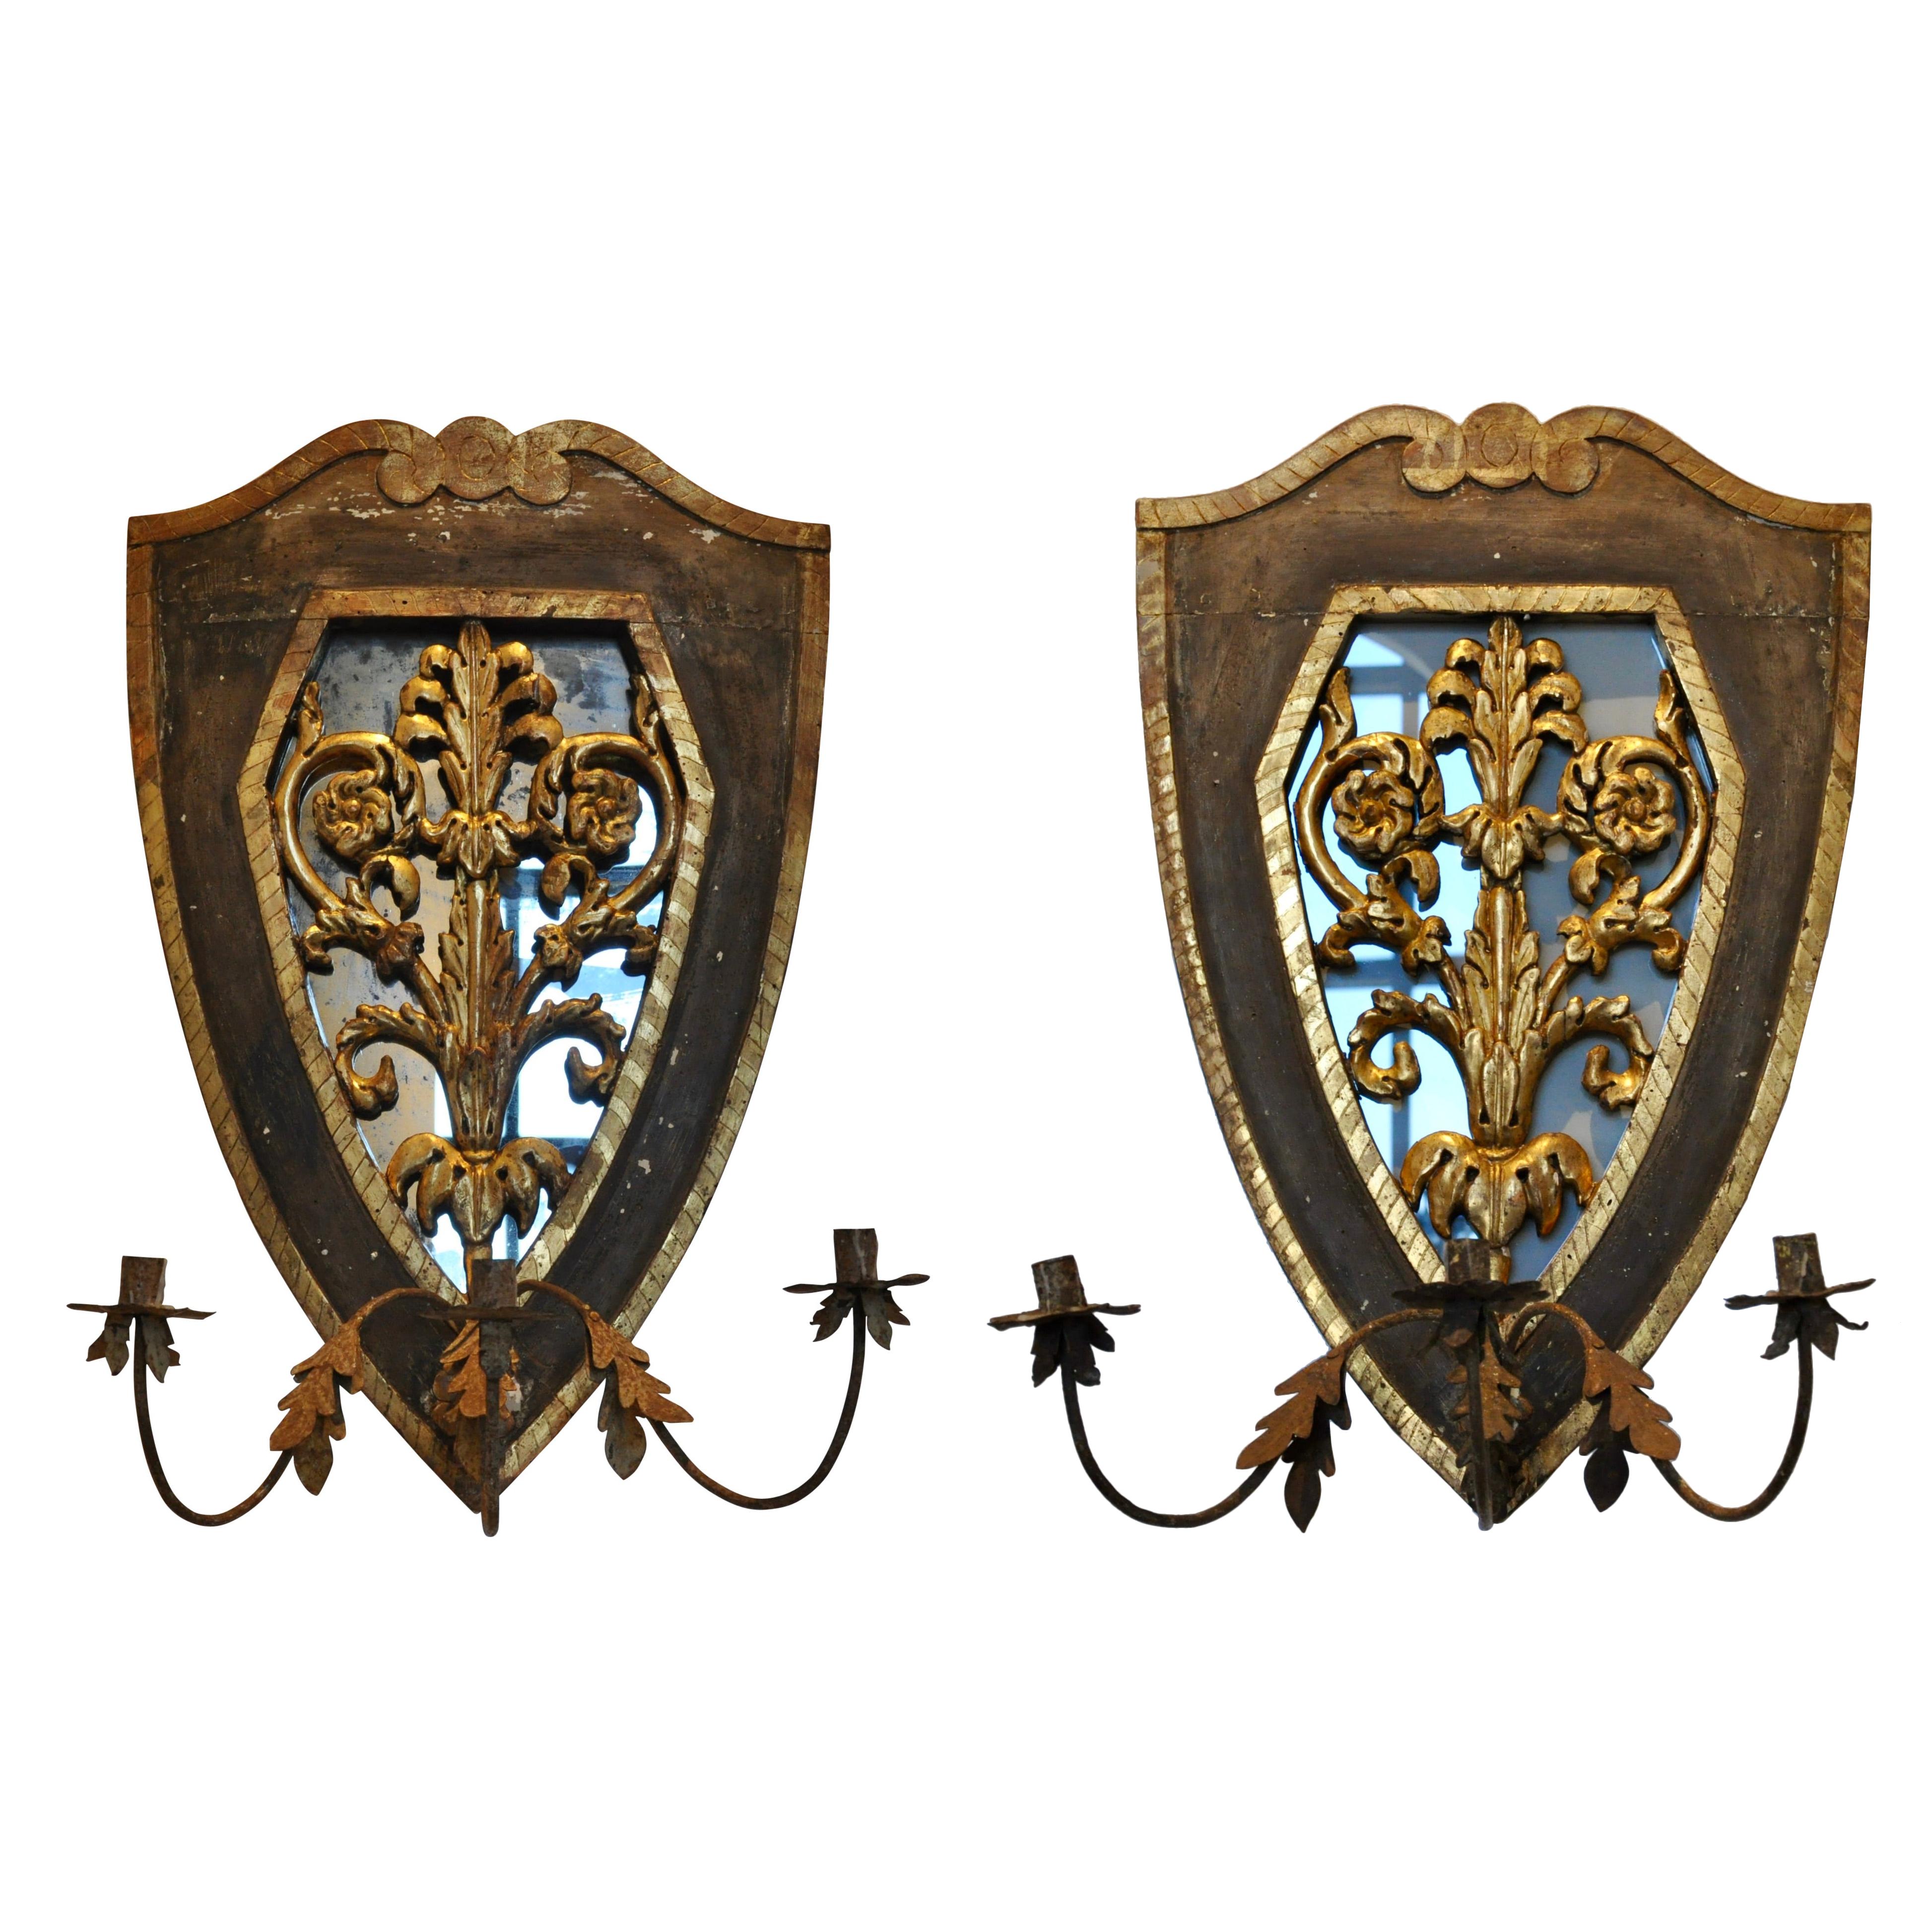 Pair of Early 19th Century Italian Neoclassical Mirrored Sconces